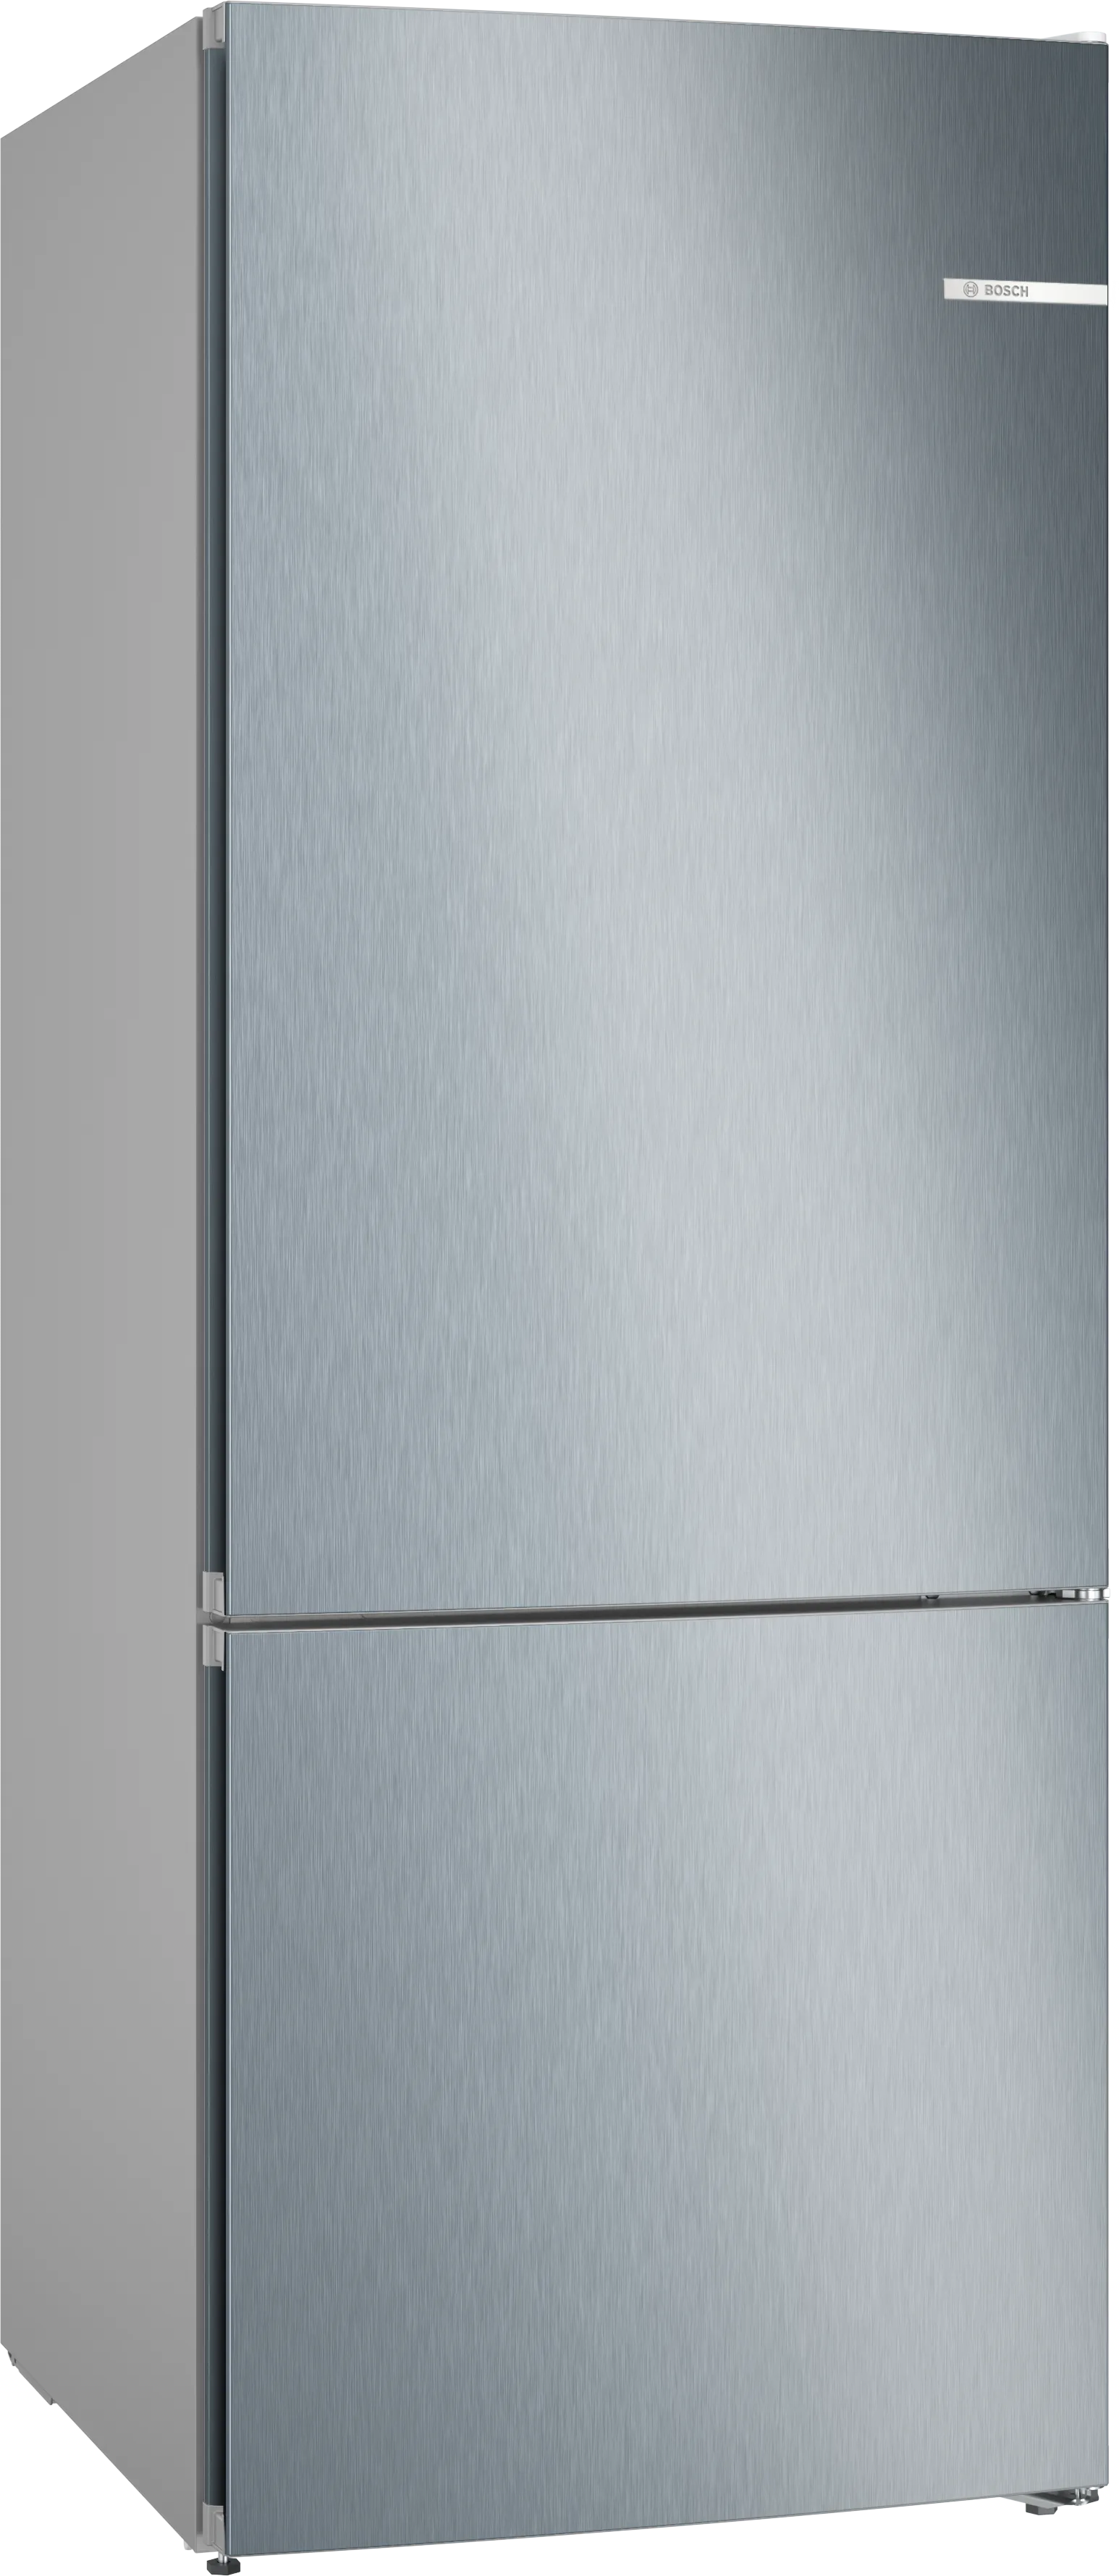 Series 4 free-standing fridge-freezer with freezer at bottom 186 x 70 cm Stainless steel look 